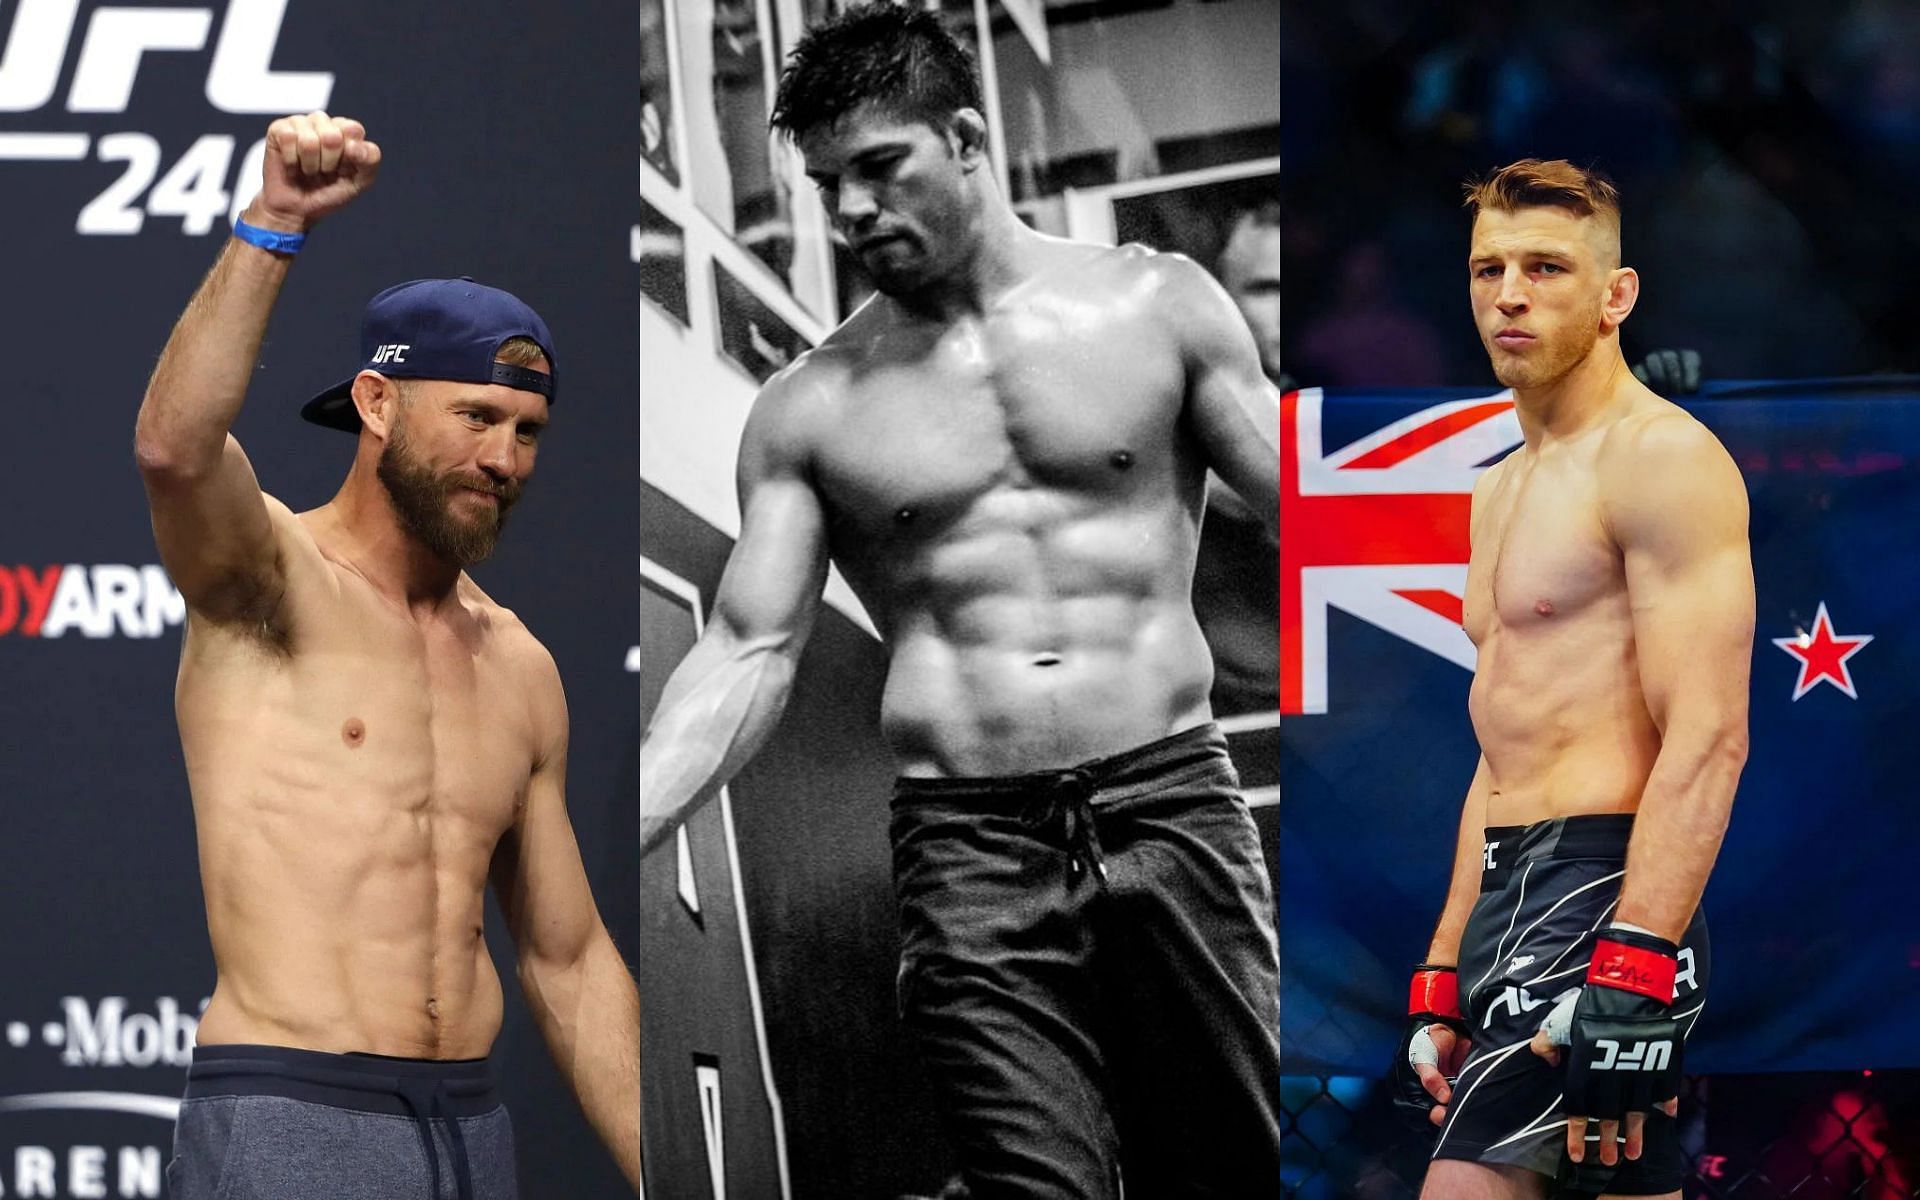 Donald Cerrone (Left), Josh Thomson (Middle), and Dan Hooker (Right) (Images courtesy of Getty and @therealpunk ig)